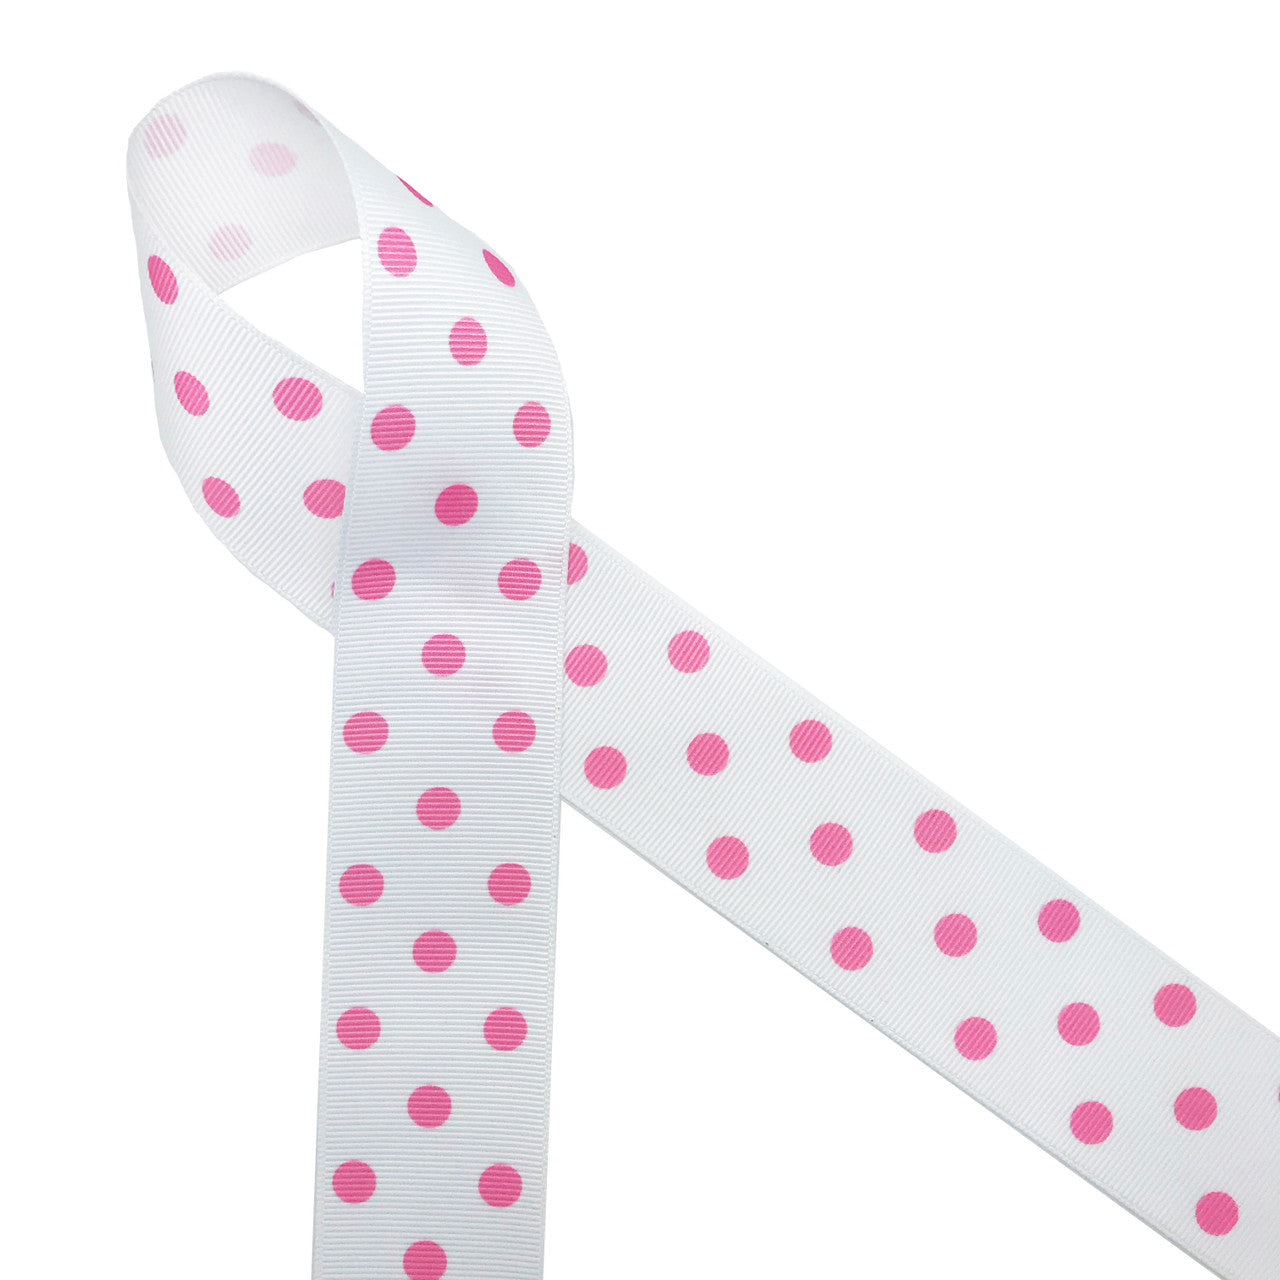 Bright pink polka dots on 1.5" white grosgrain ribbon is a fun pattern for hair bows, hat bands, trims and gift wrap!